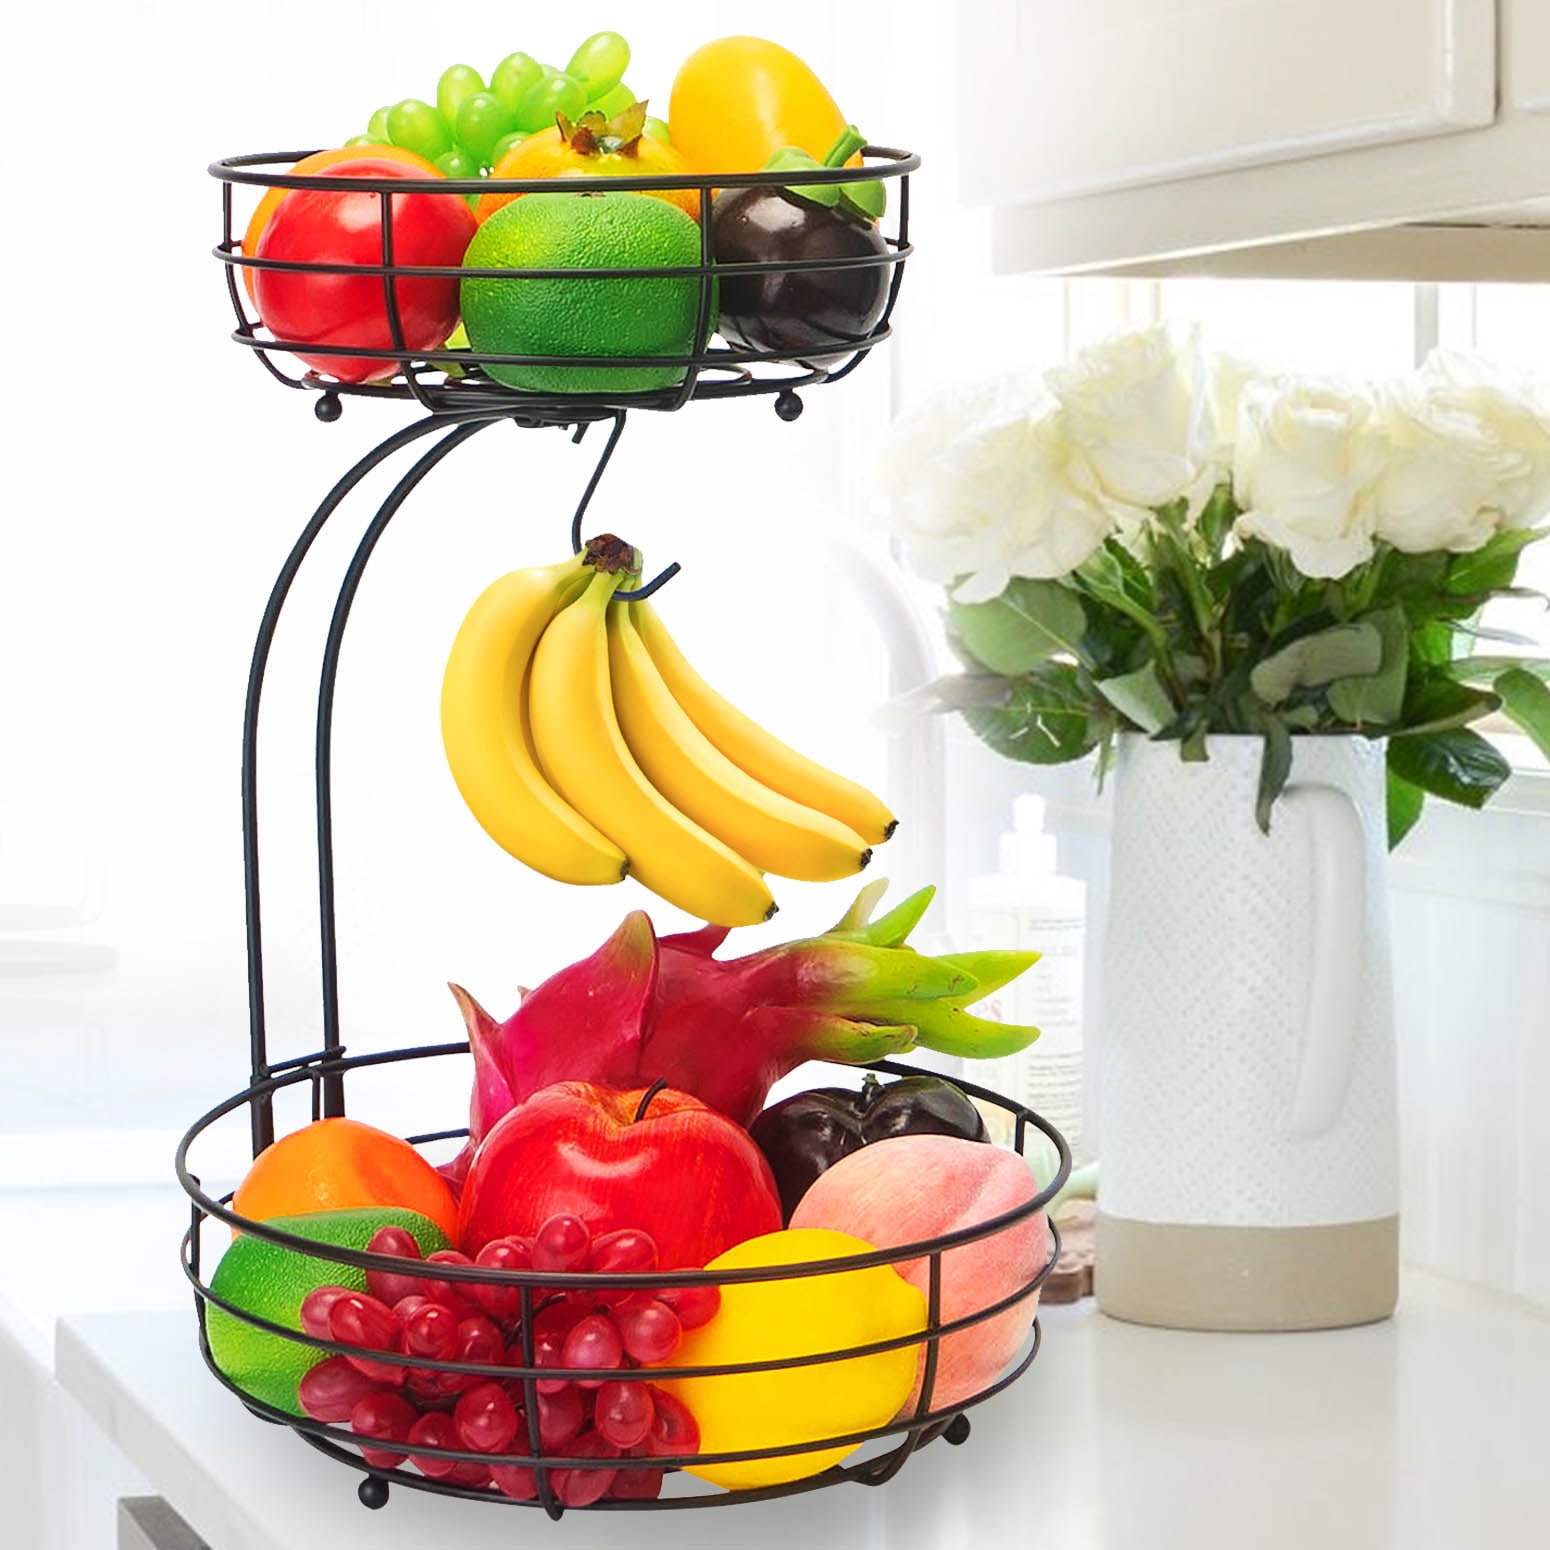 LAMEIDA Fruit Bowl Drain Basket Wired Vegetables Rack with Banana Hook Cupboard Organiser for Kitchen Counter White 